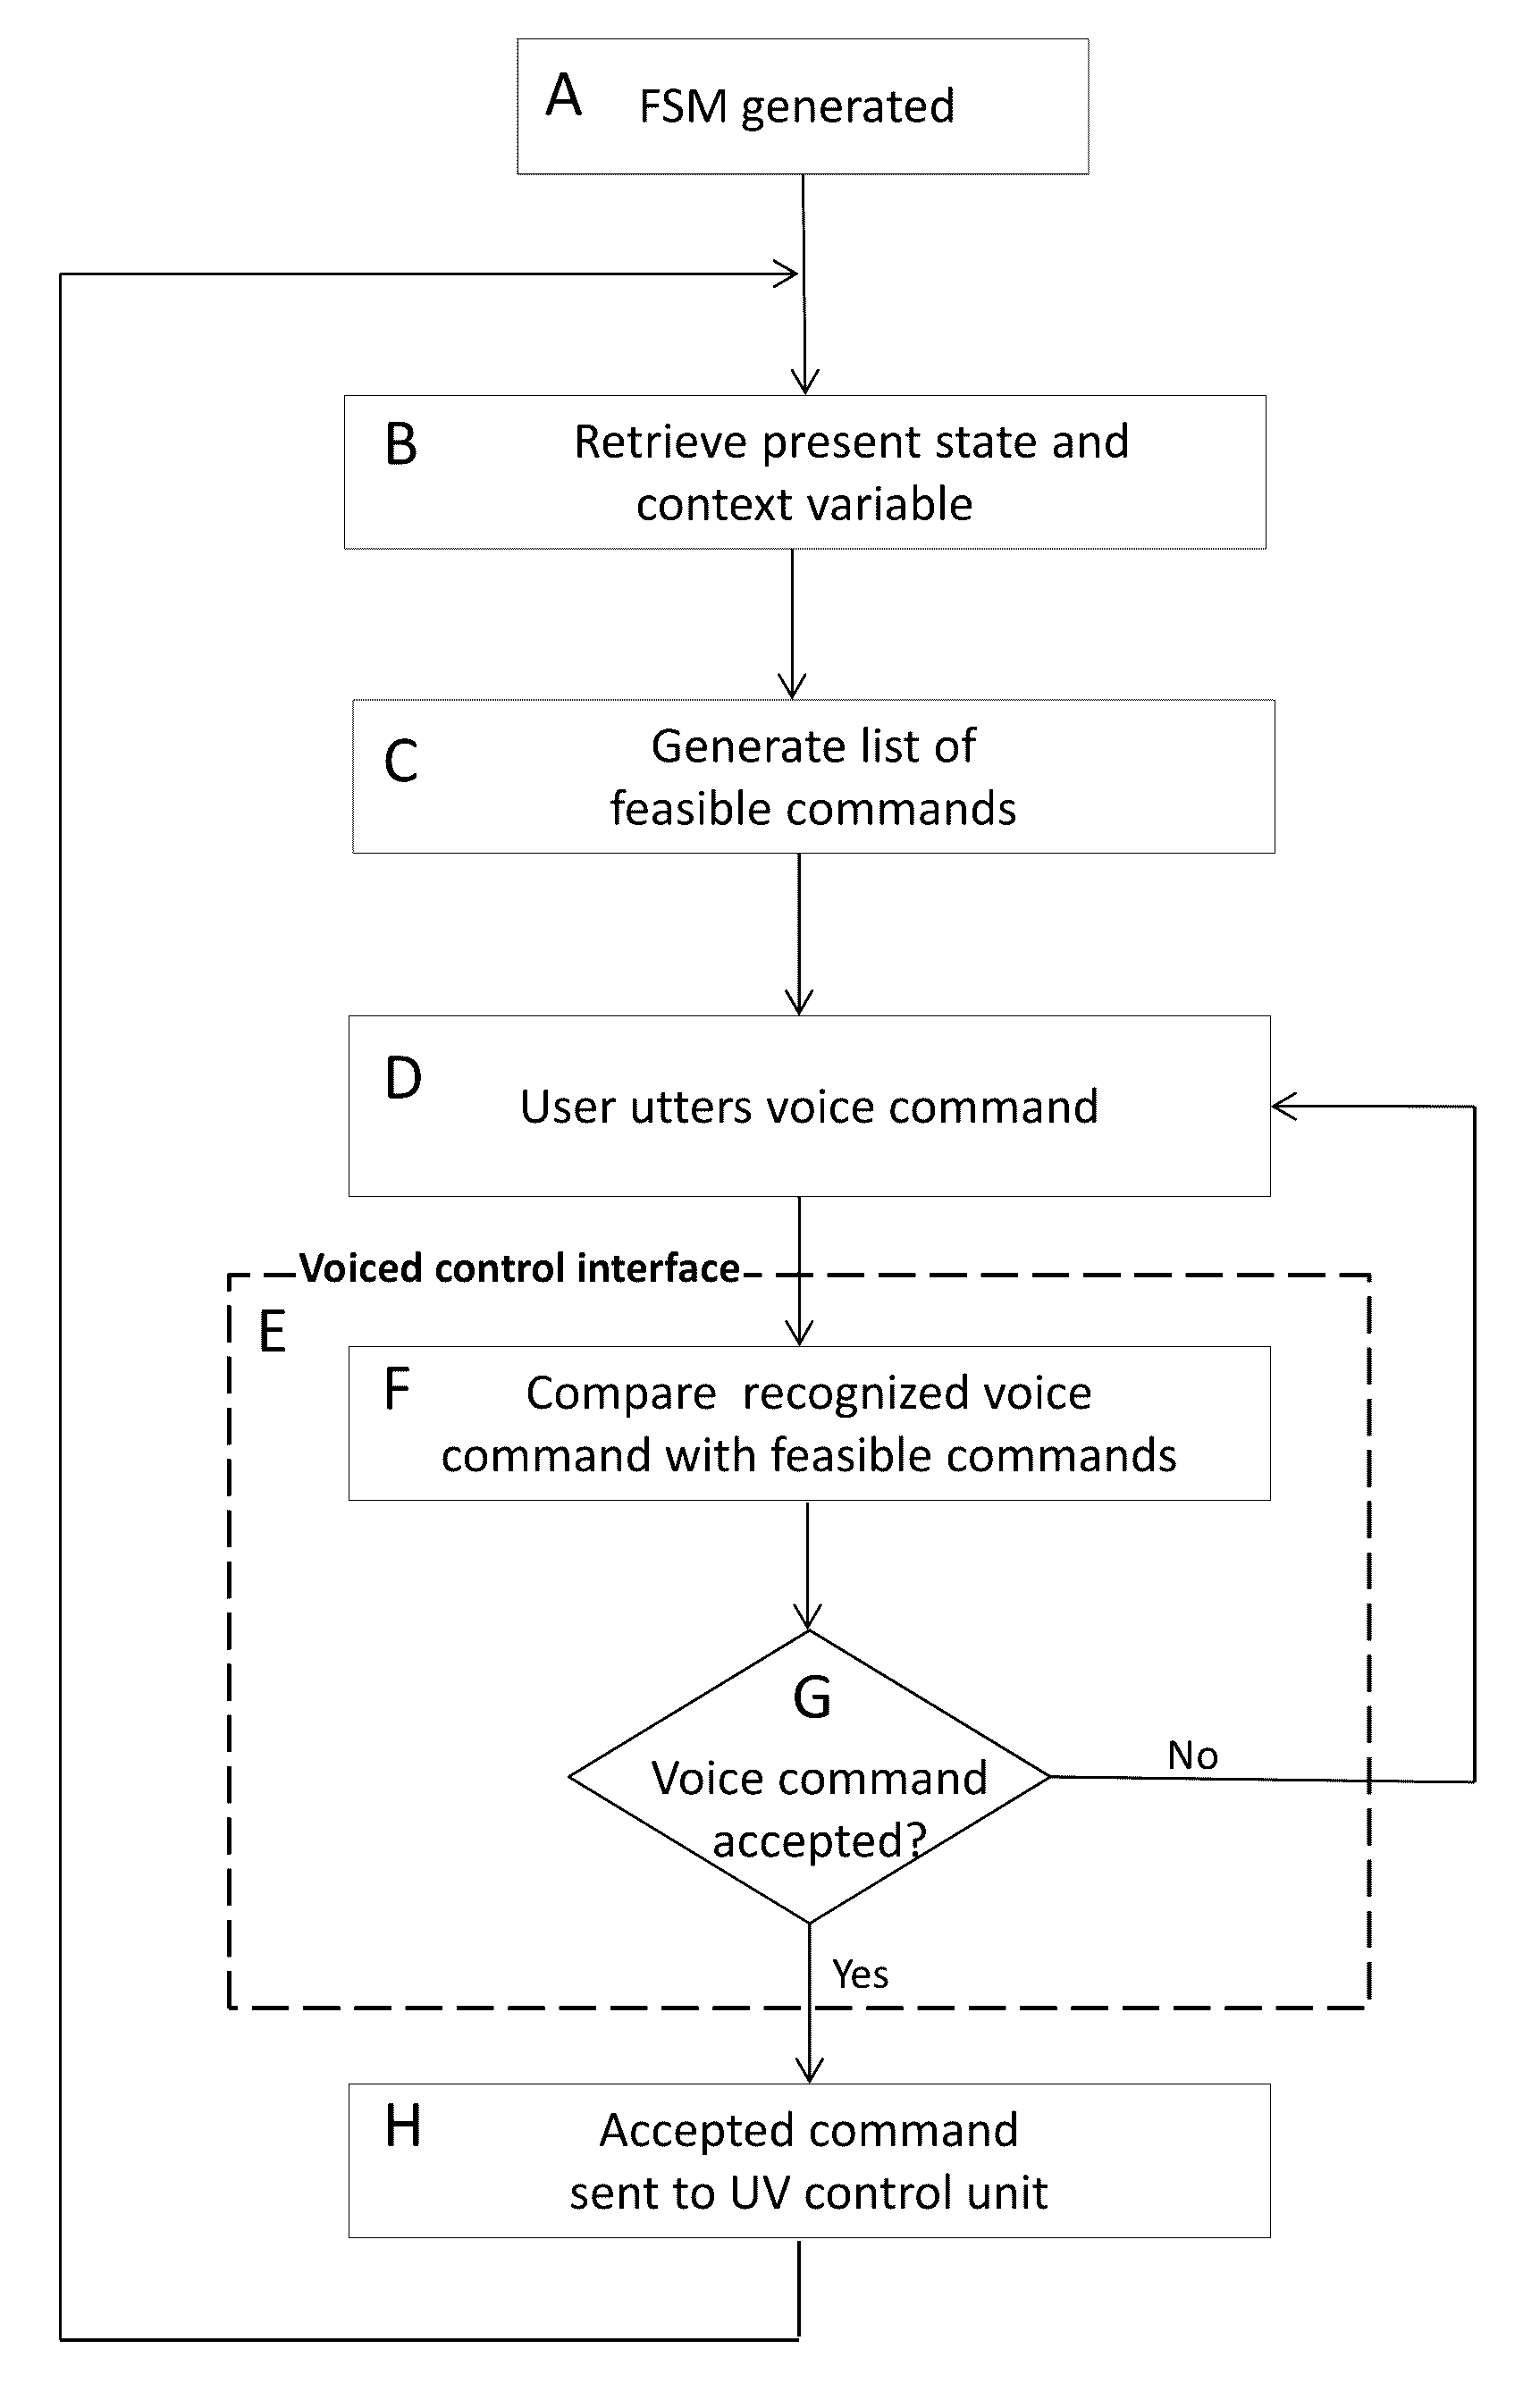 State and context dependent voice based interface for an unmanned vehicle or robot